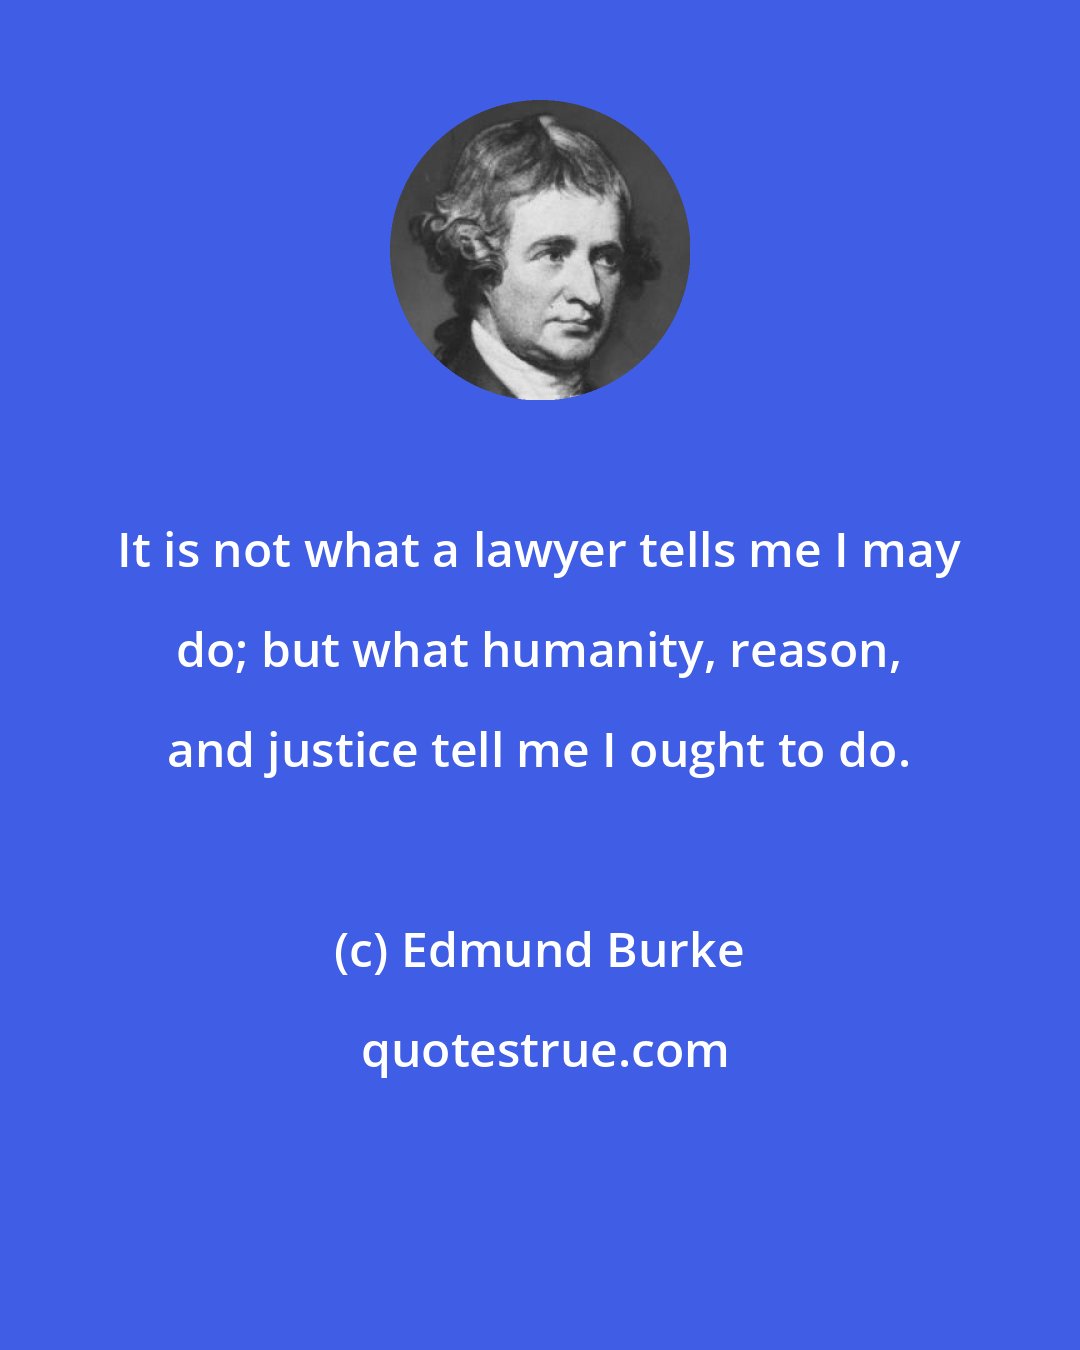 Edmund Burke: It is not what a lawyer tells me I may do; but what humanity, reason, and justice tell me I ought to do.